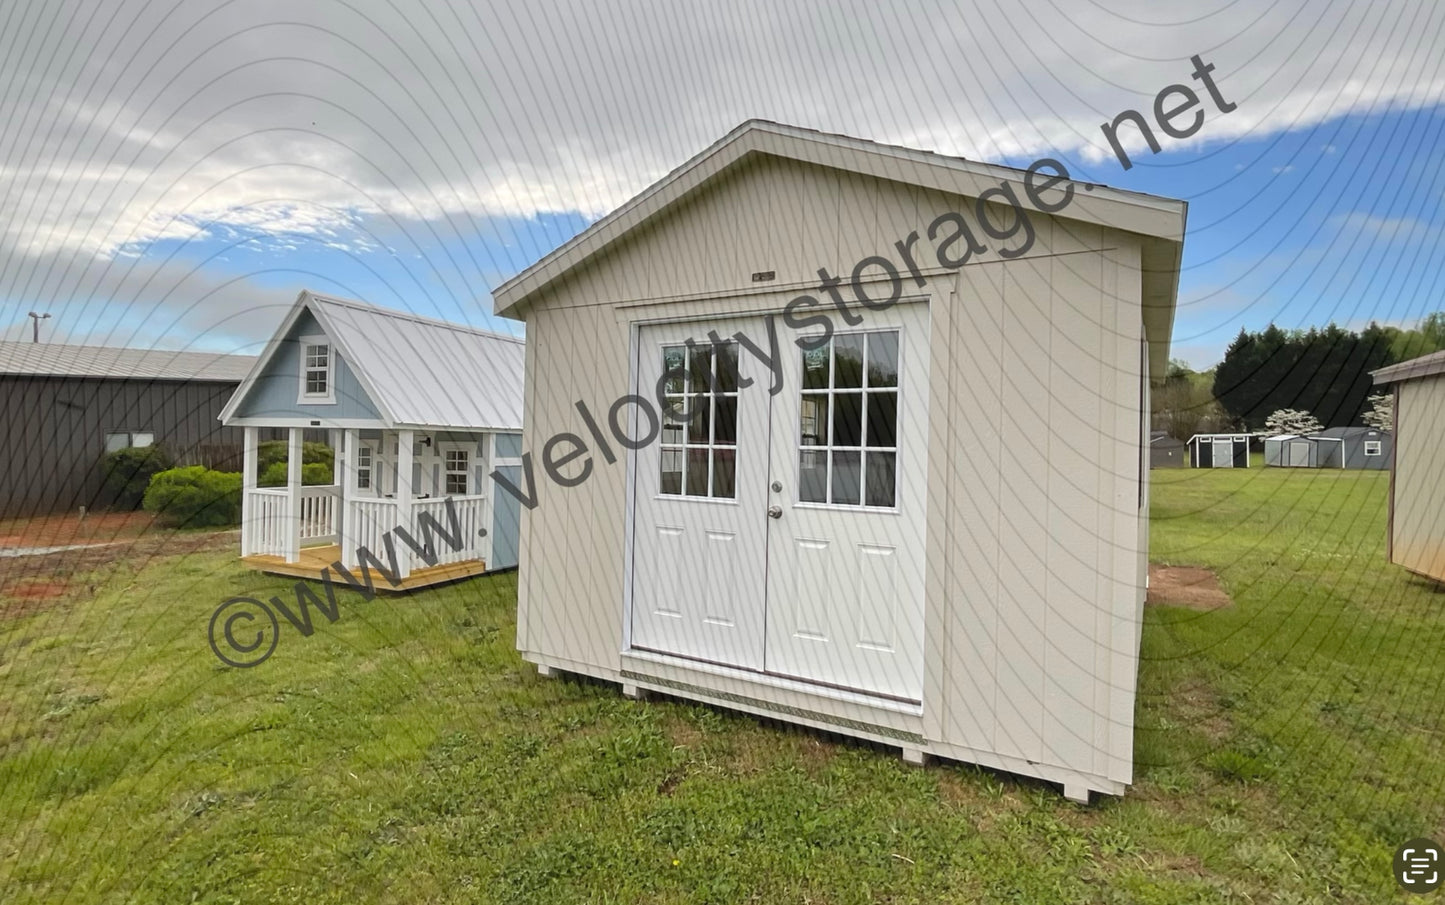 12X20 Cottage          ON SALE FOR $ 12,162.57        WAS $15,985.55